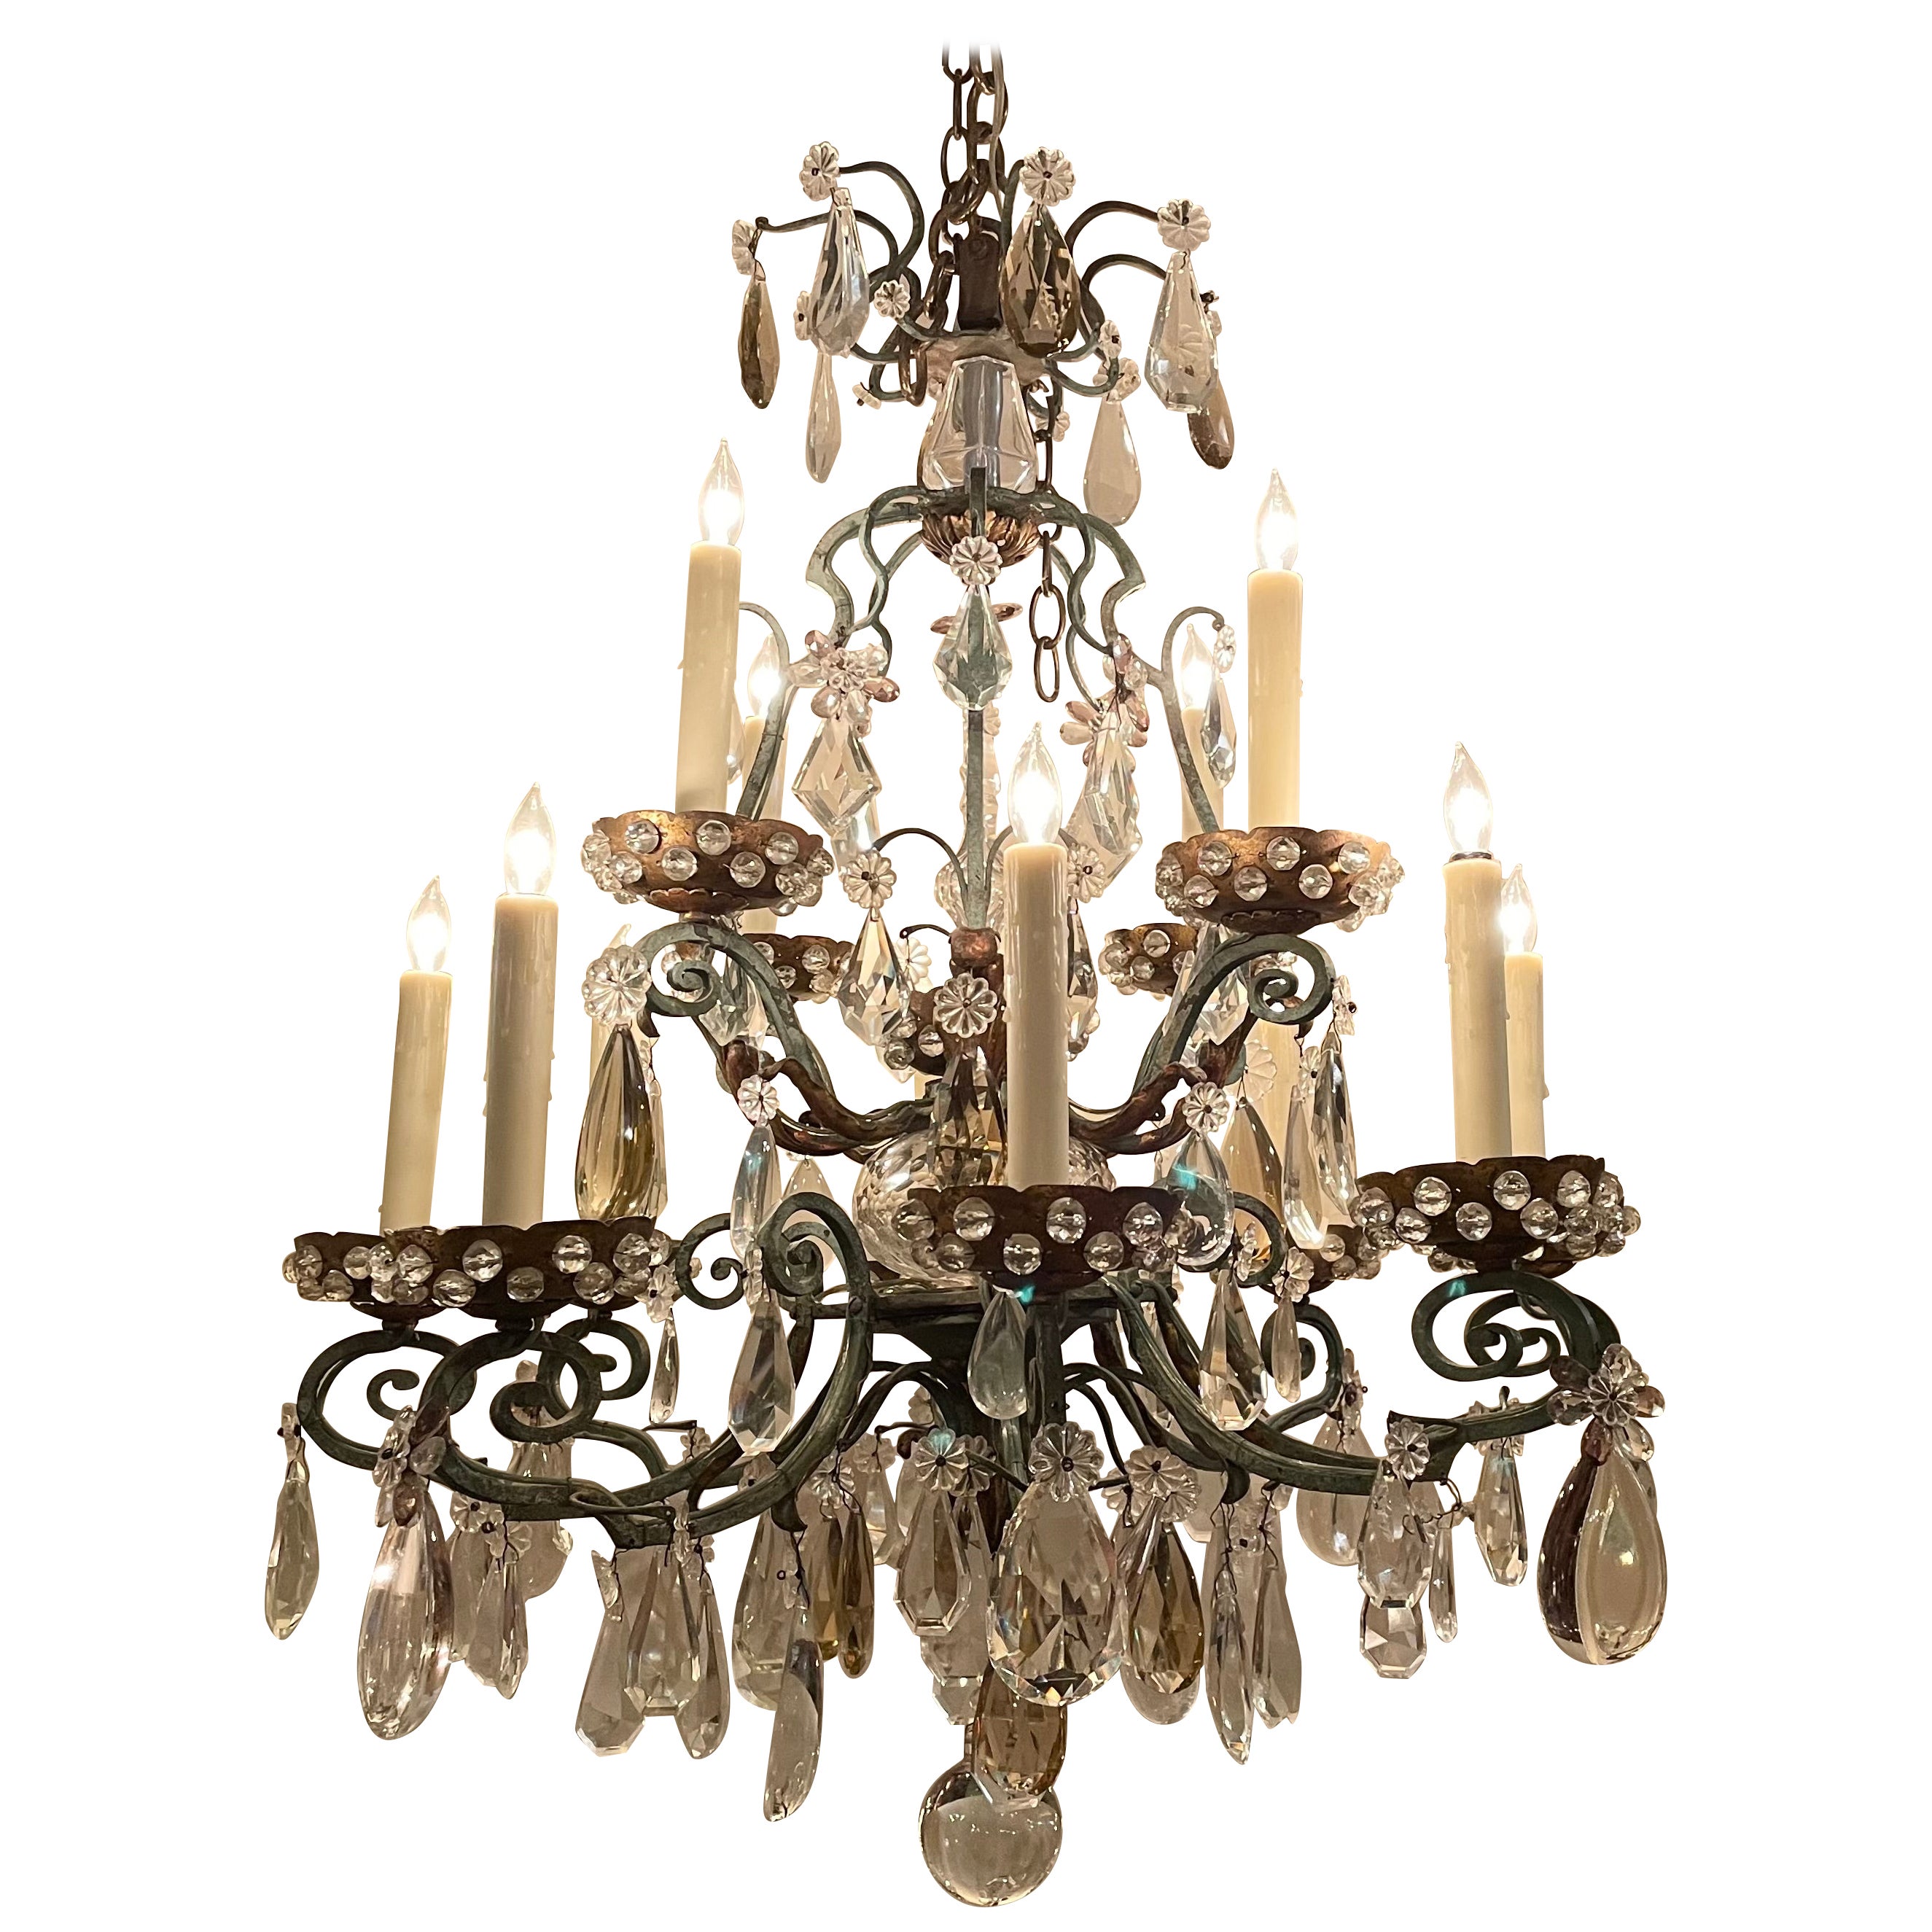 Antique French Wrought Iron & Crystal Chandelier circa 1900